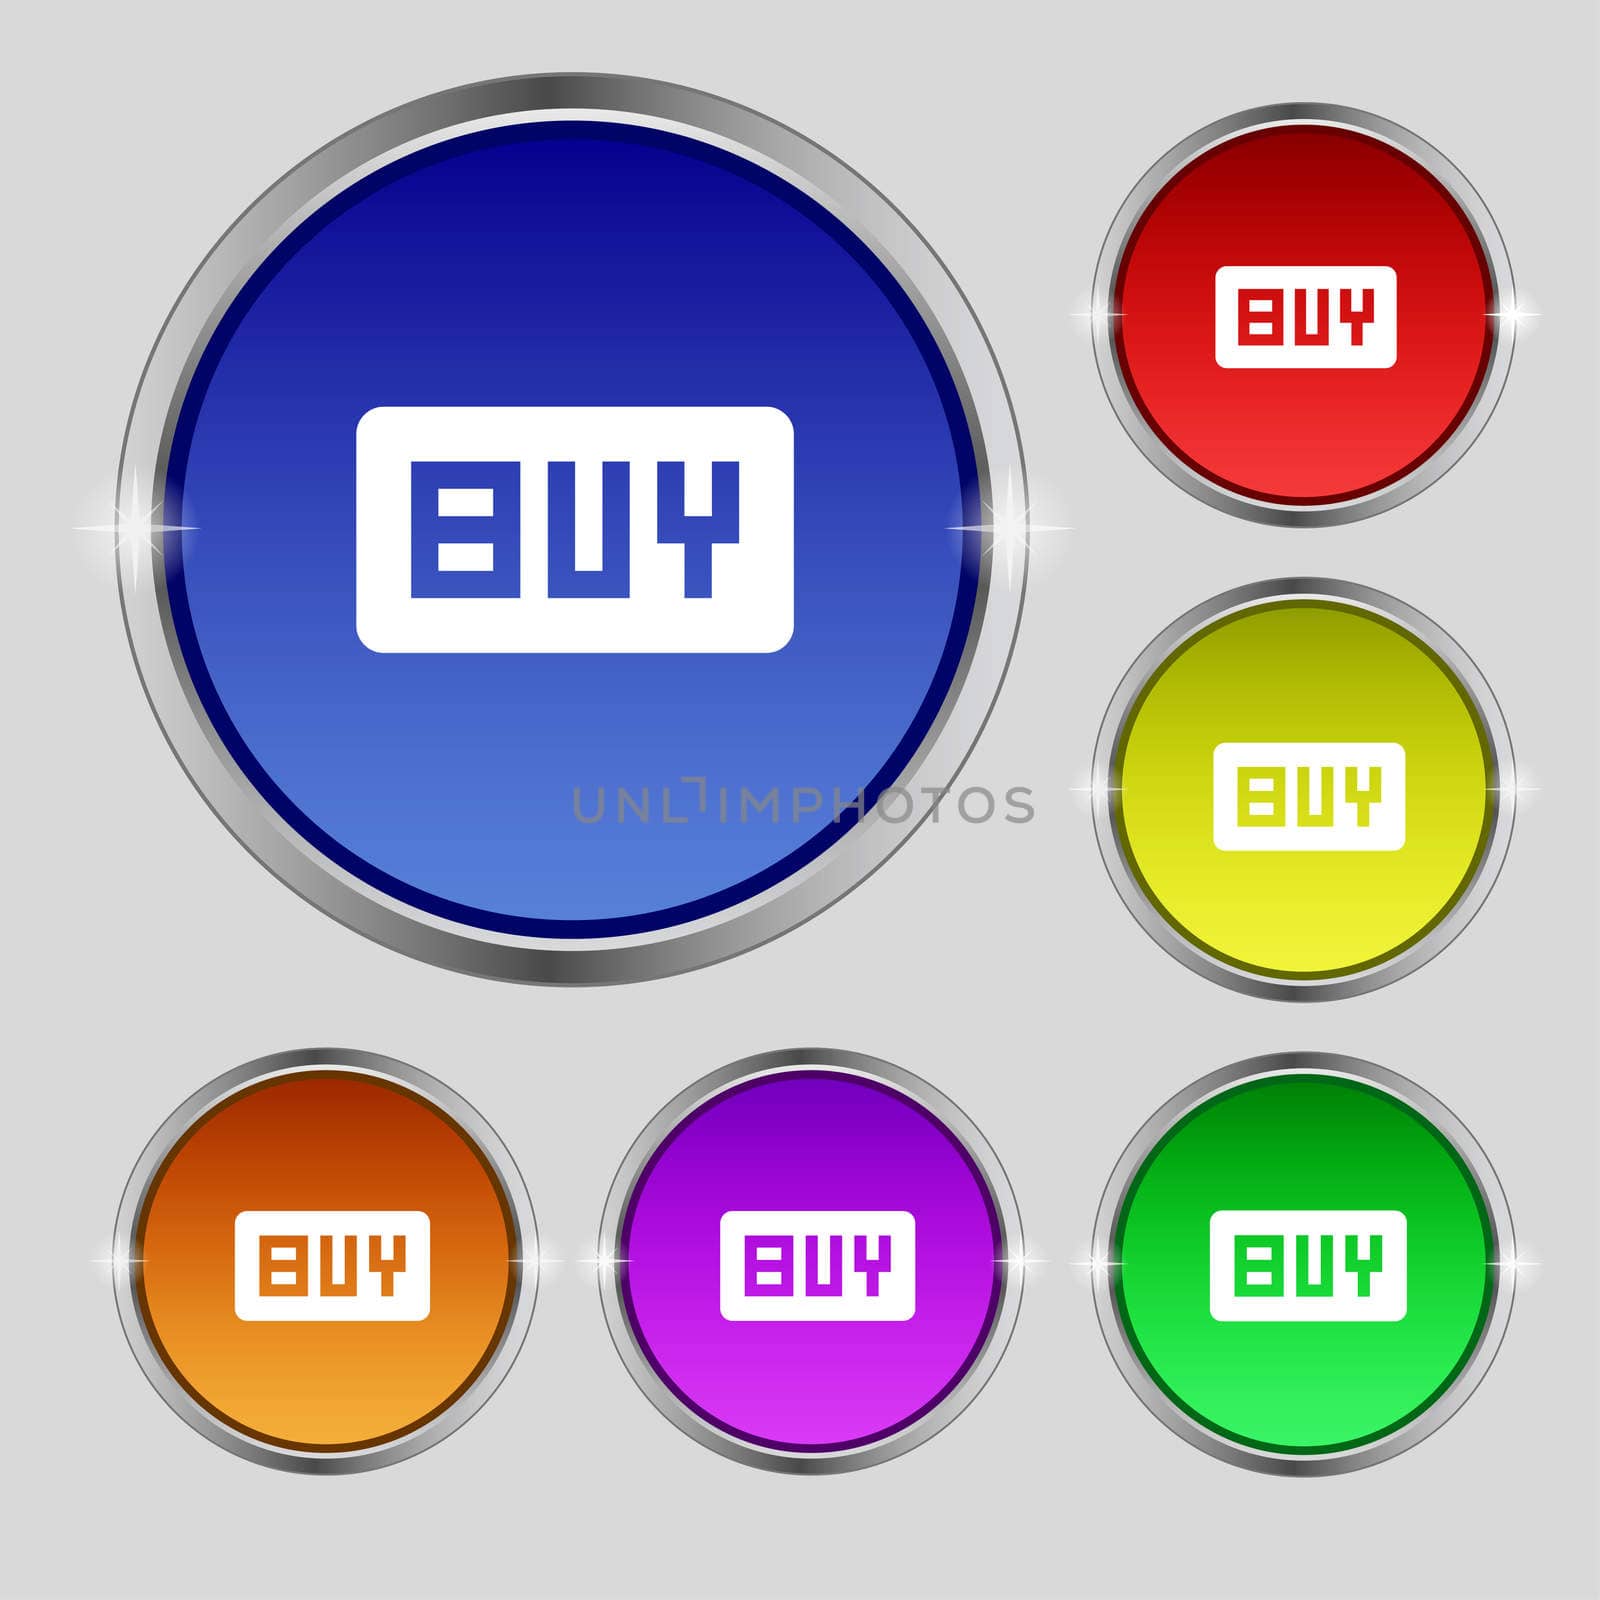 Buy, Online buying dollar usd icon sign. Round symbol on bright colourful buttons.  by serhii_lohvyniuk